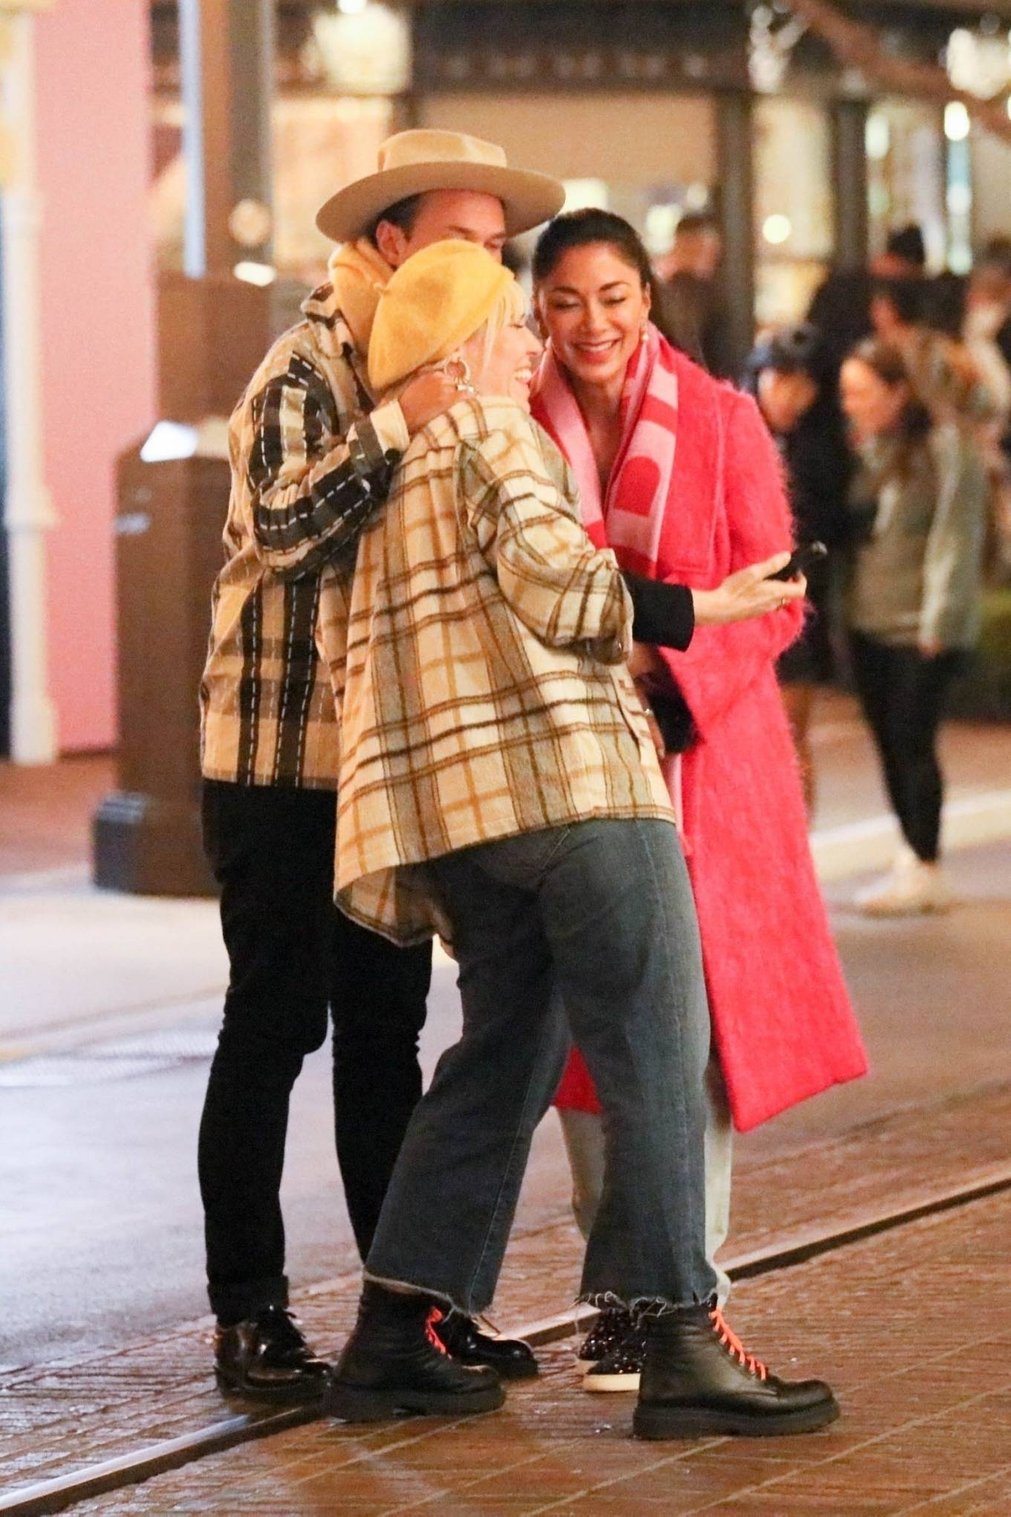 Nicole Scherzinger 2021 : Nicole Scherzinger – Stops to take photos while at The Grove with friends in Los Angeles-02